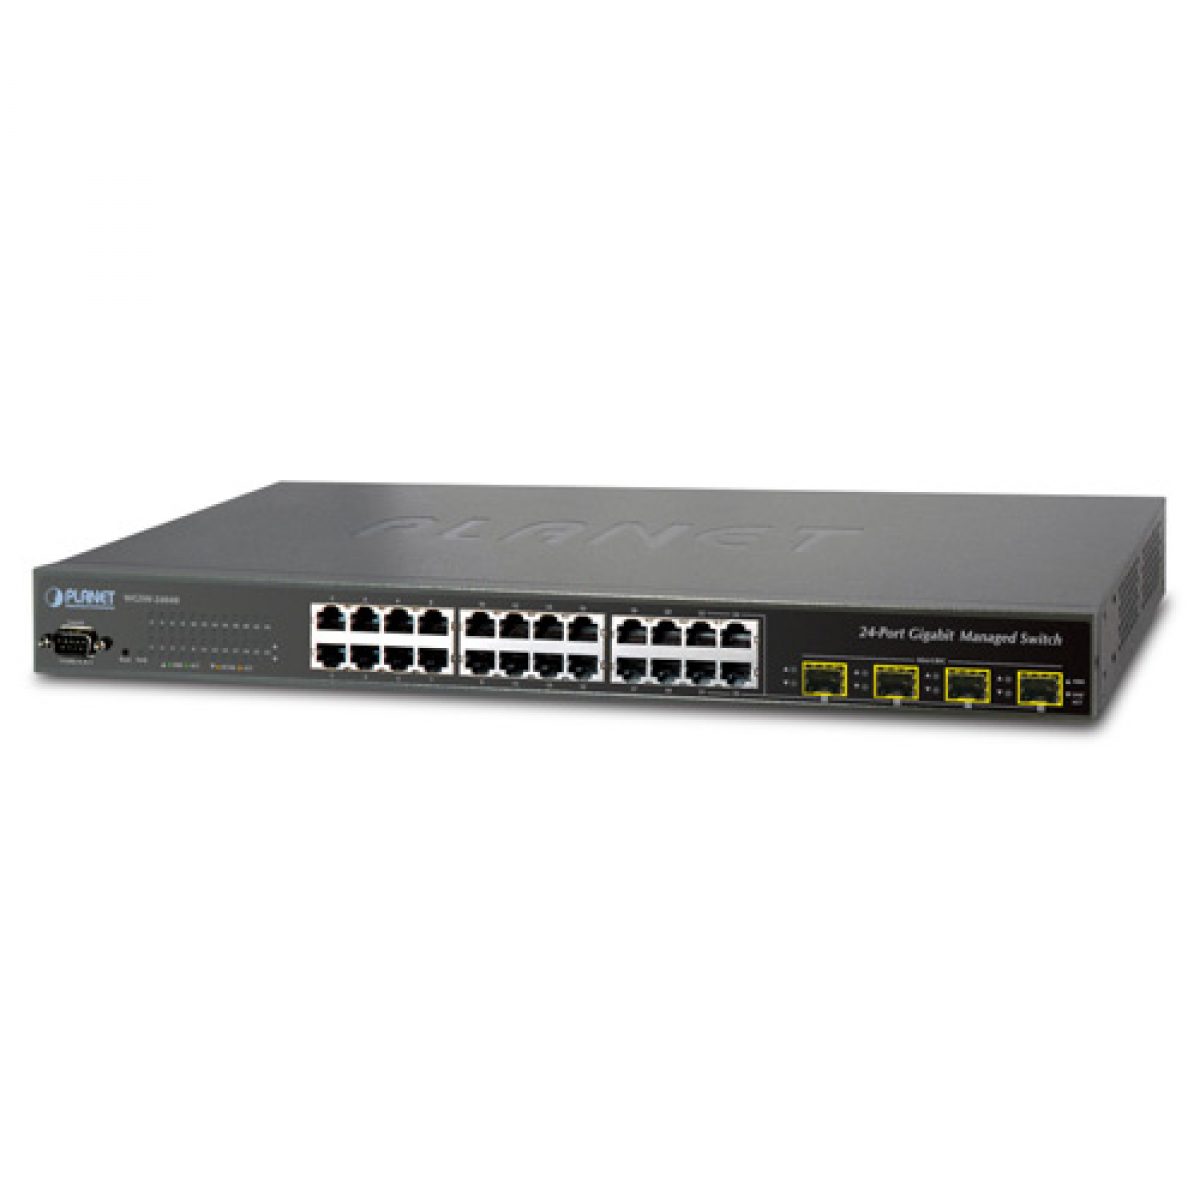 WGSW-24040R Managed Switch 24-Port 10/100/1000Mbps with 4 Shared